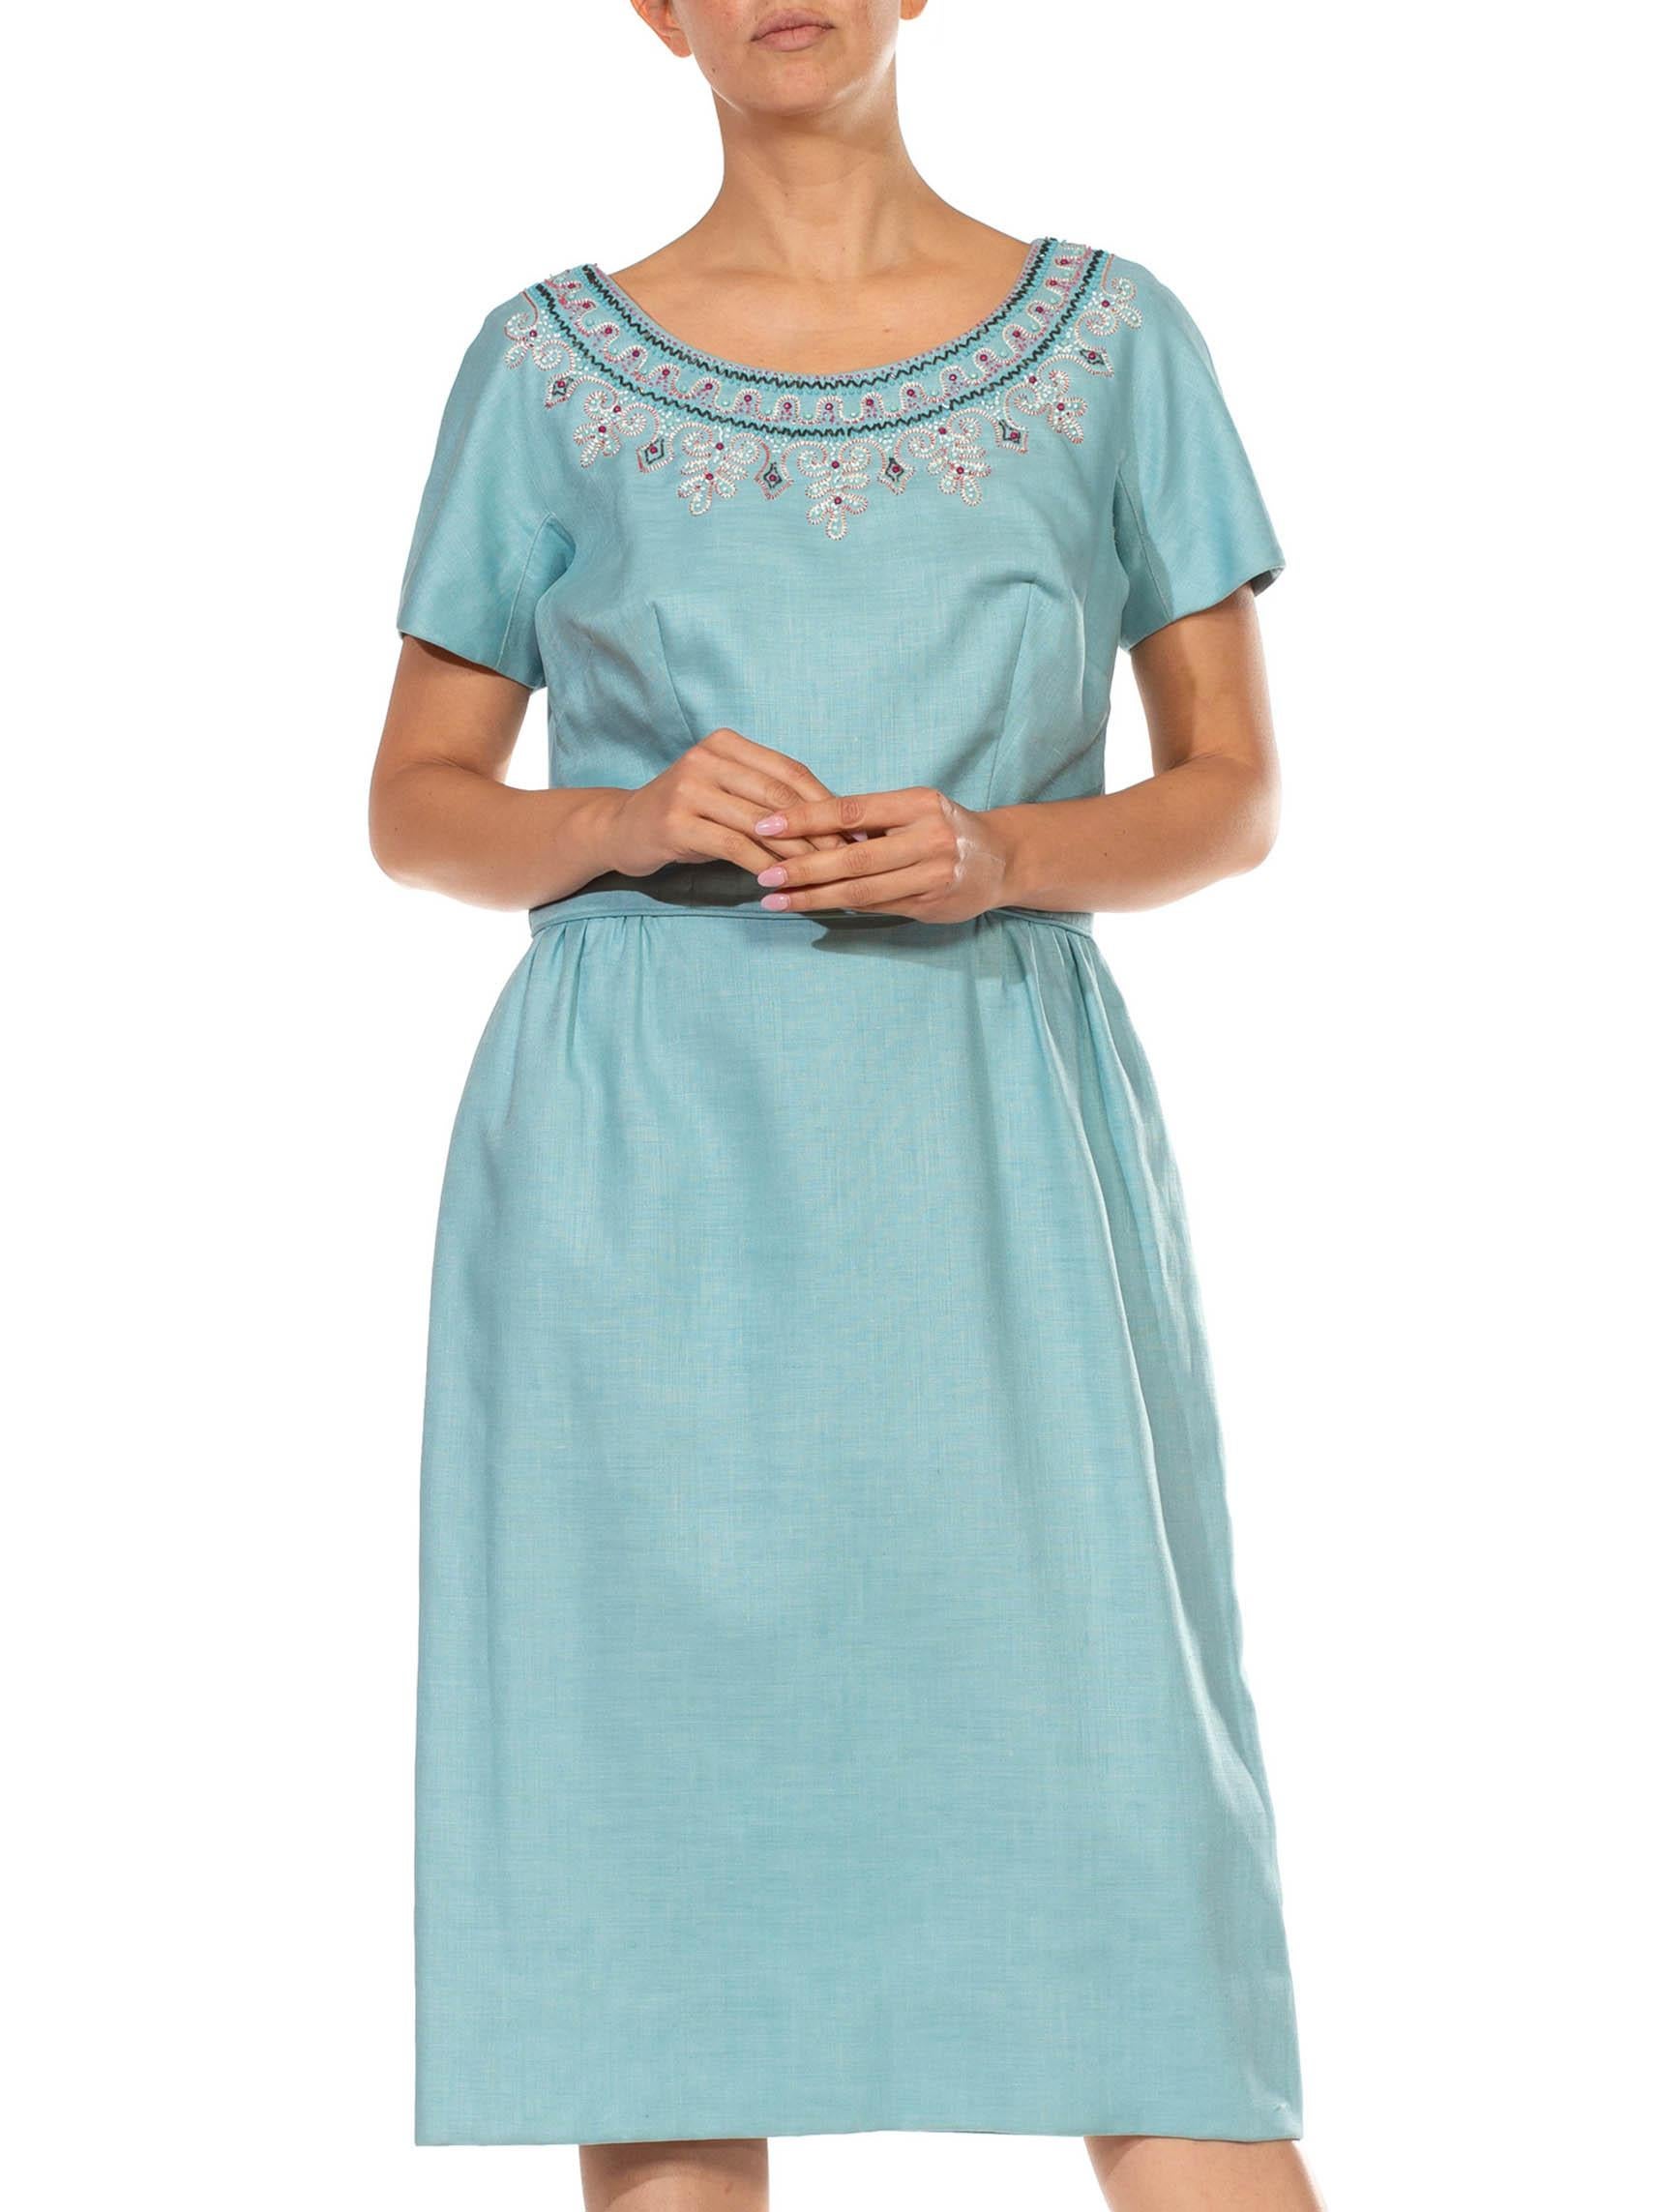 1950S NICHOLAS UNGAR Light Blue Linen White & Red Beaded Embroidered Dress For Sale 3